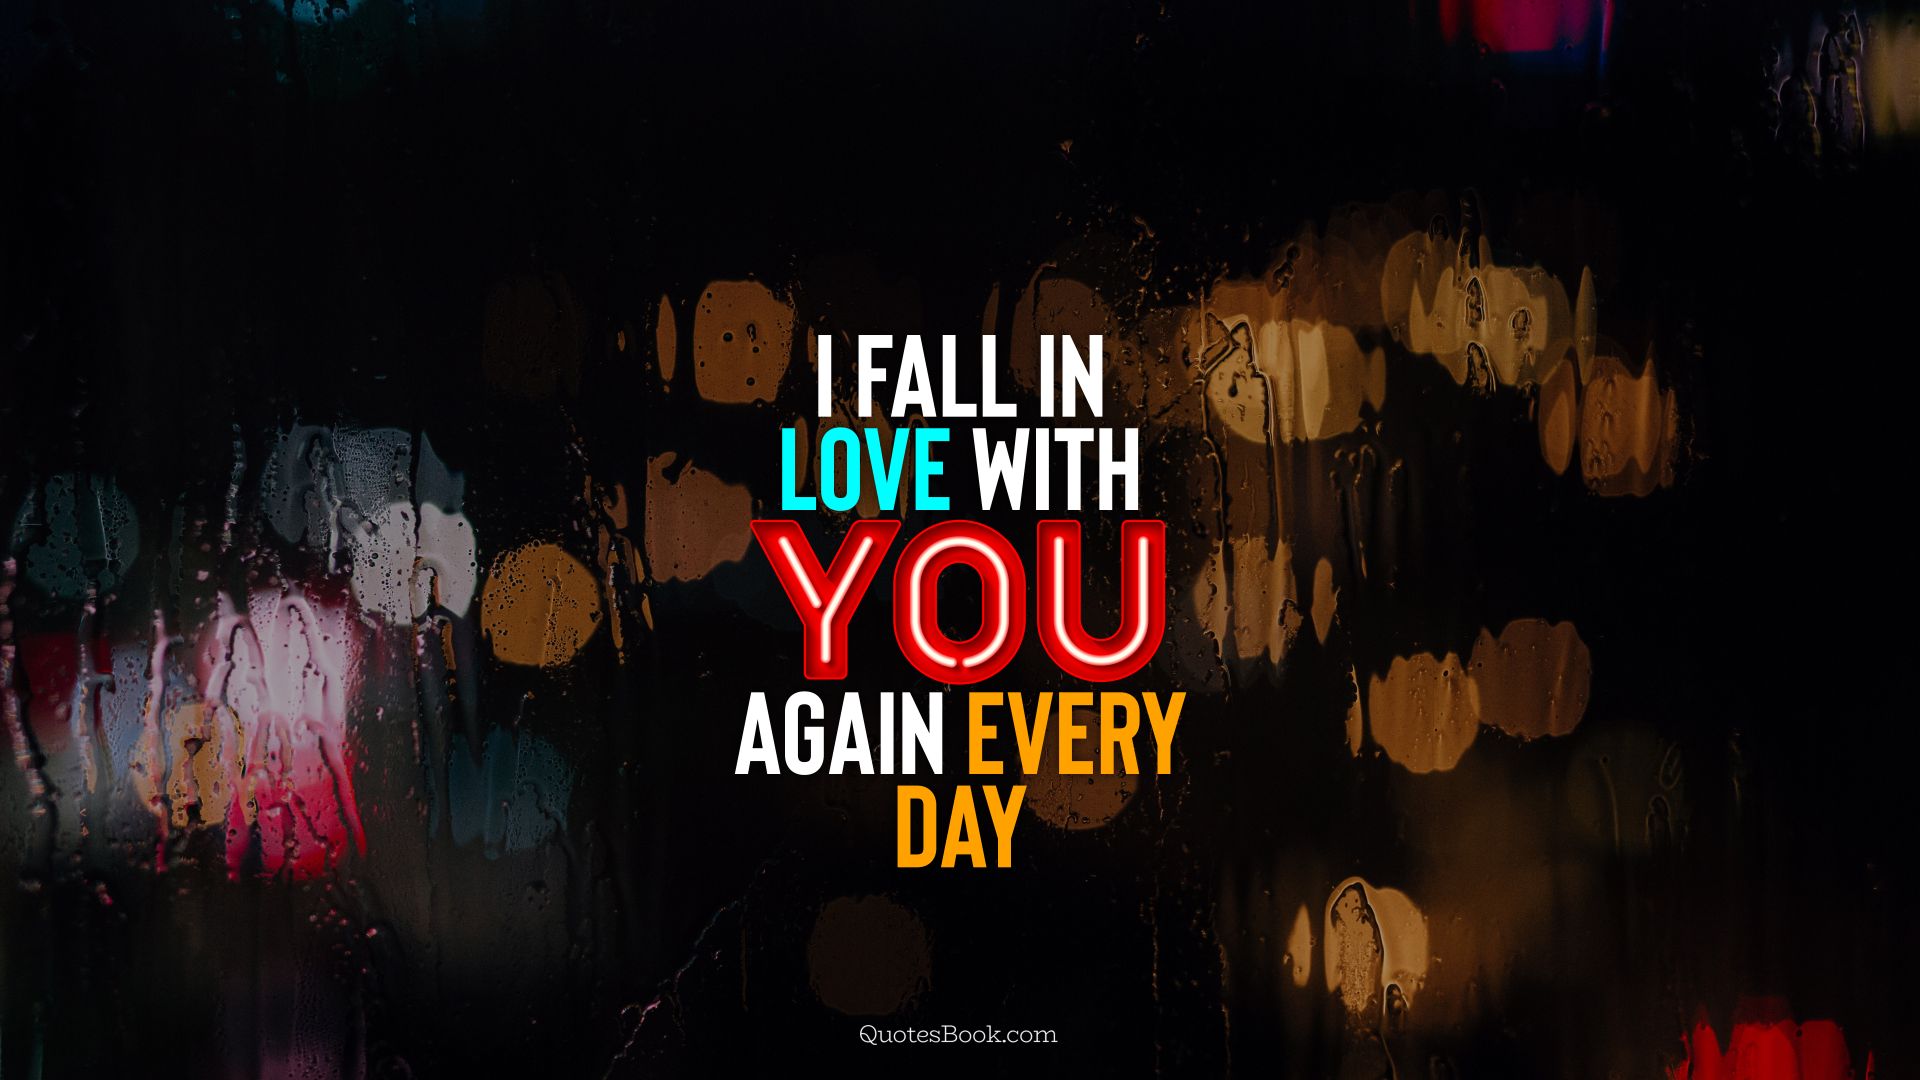 I fall in love with you again every day. - Quote by QuotesBook